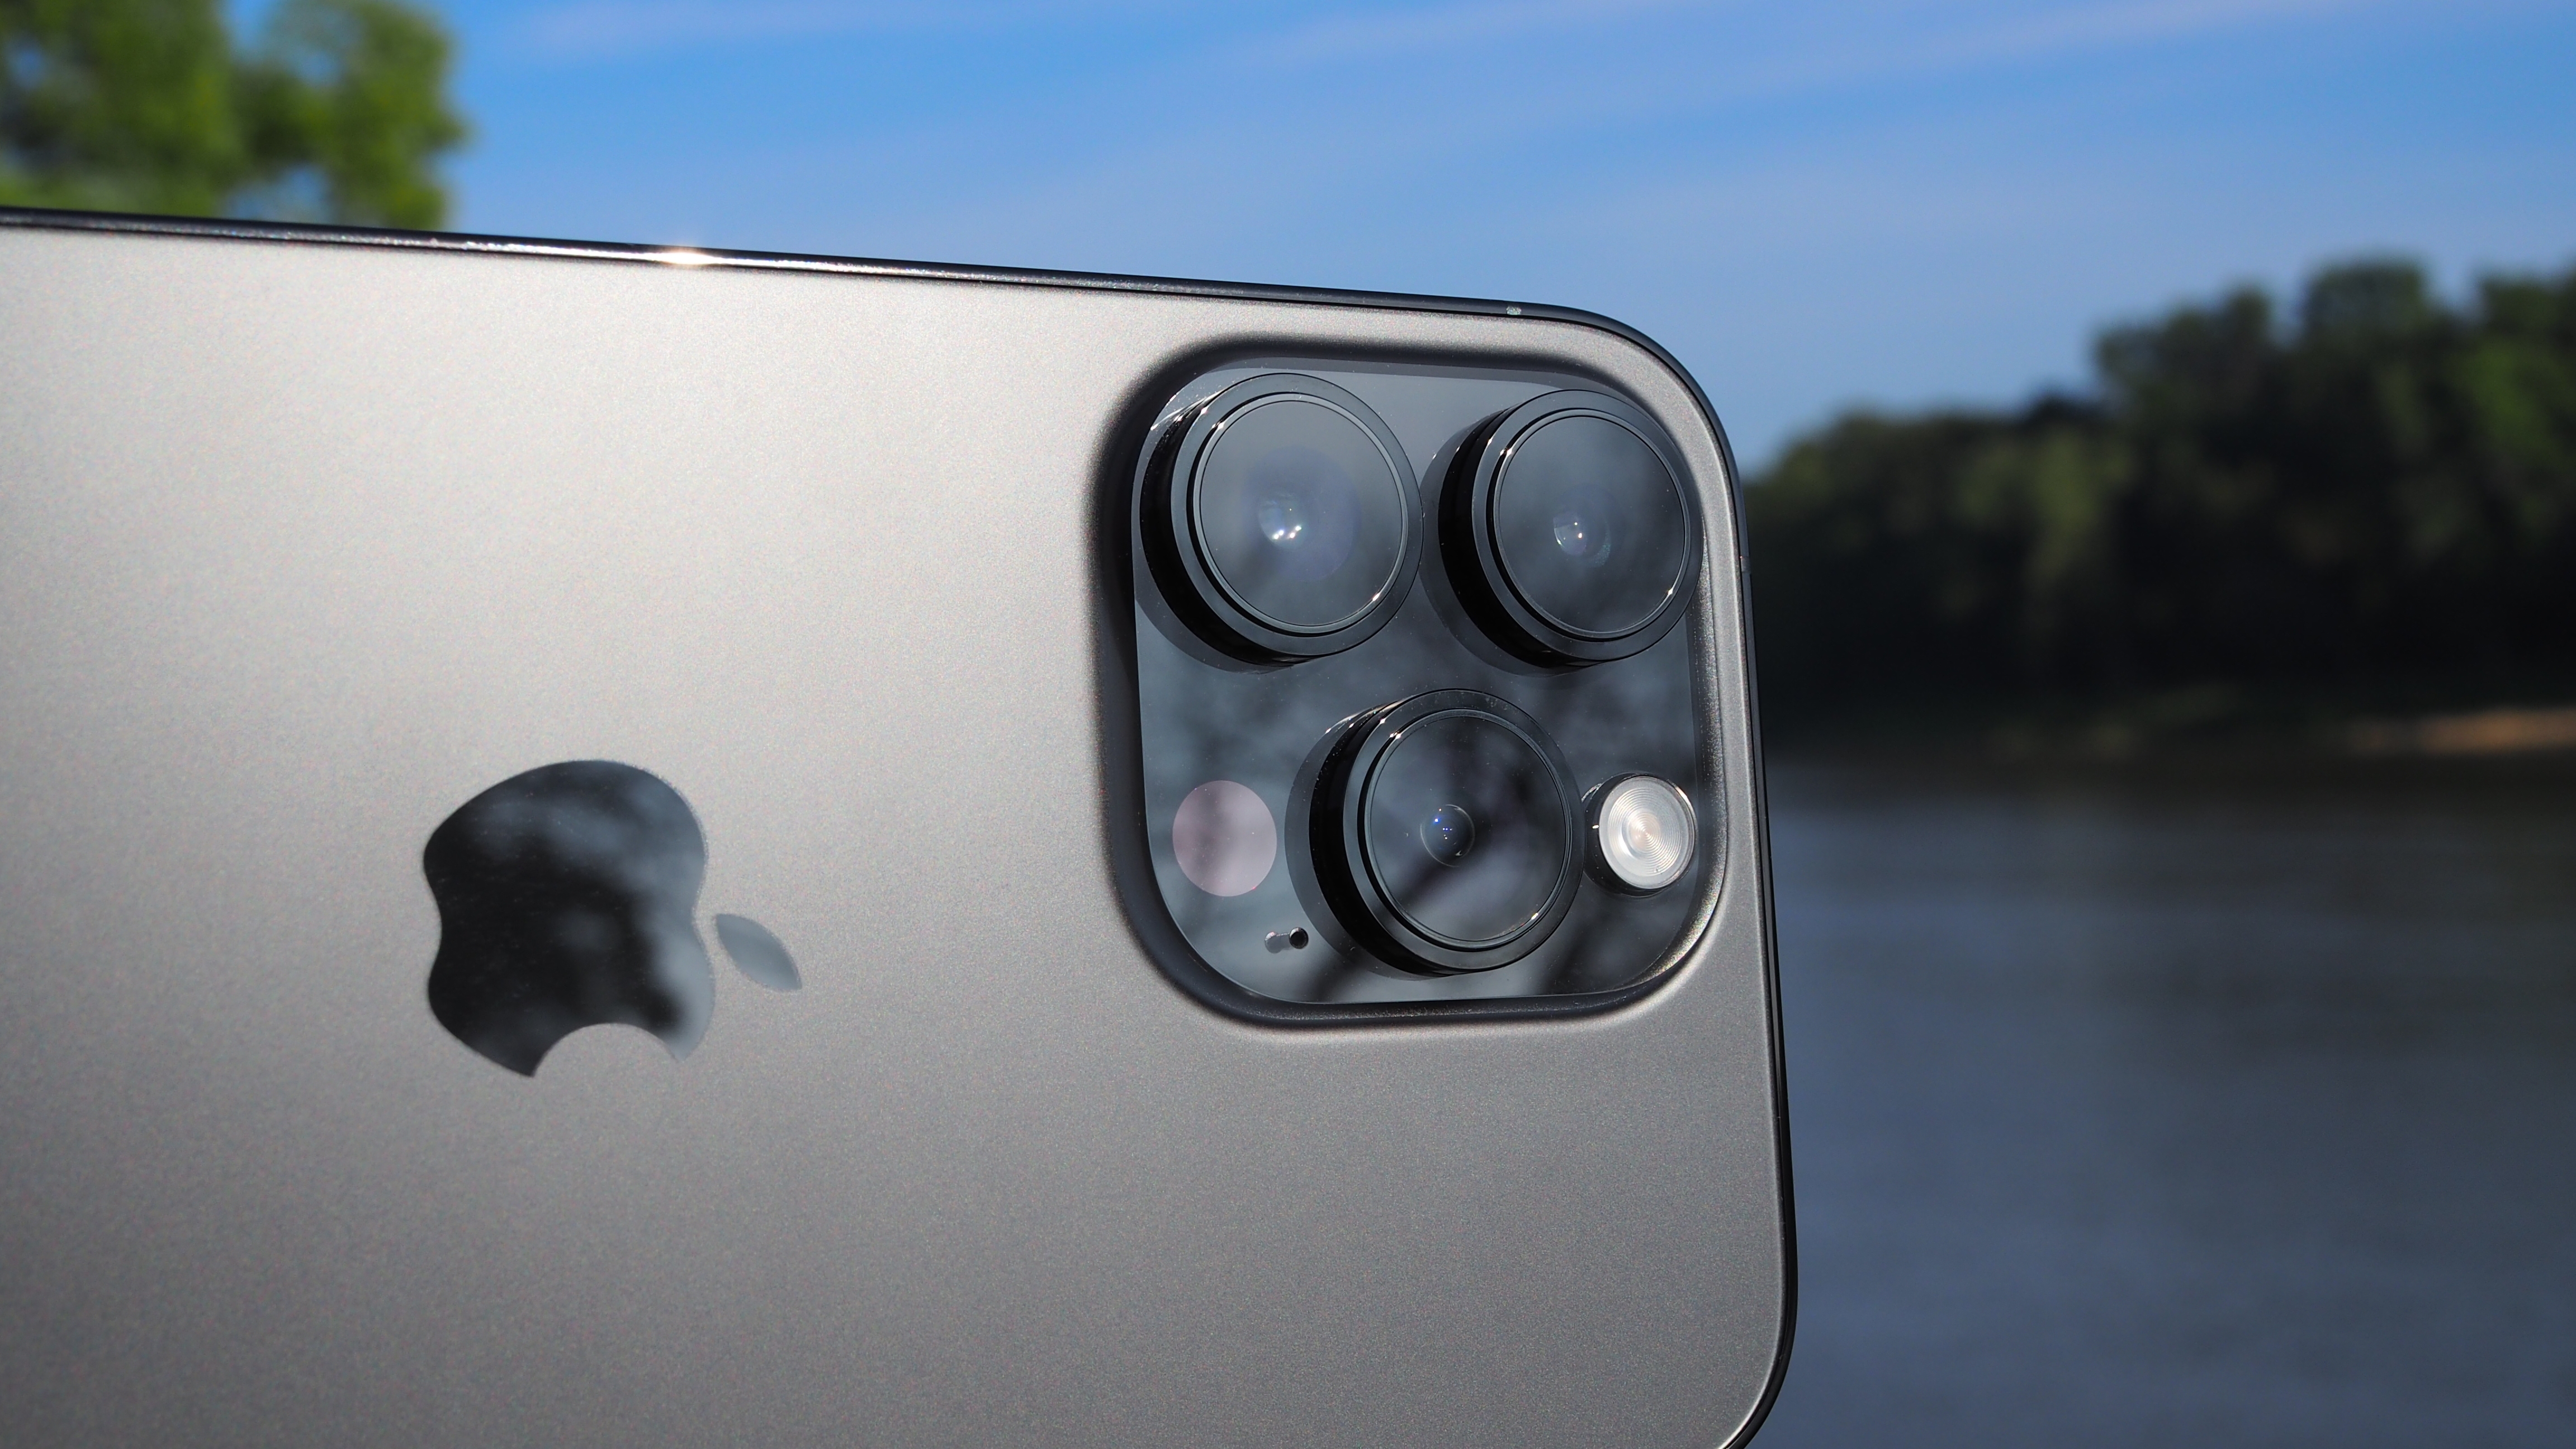 Camera upgrades could mean iPhone 15 and iPhone 15 Plus release is delayed